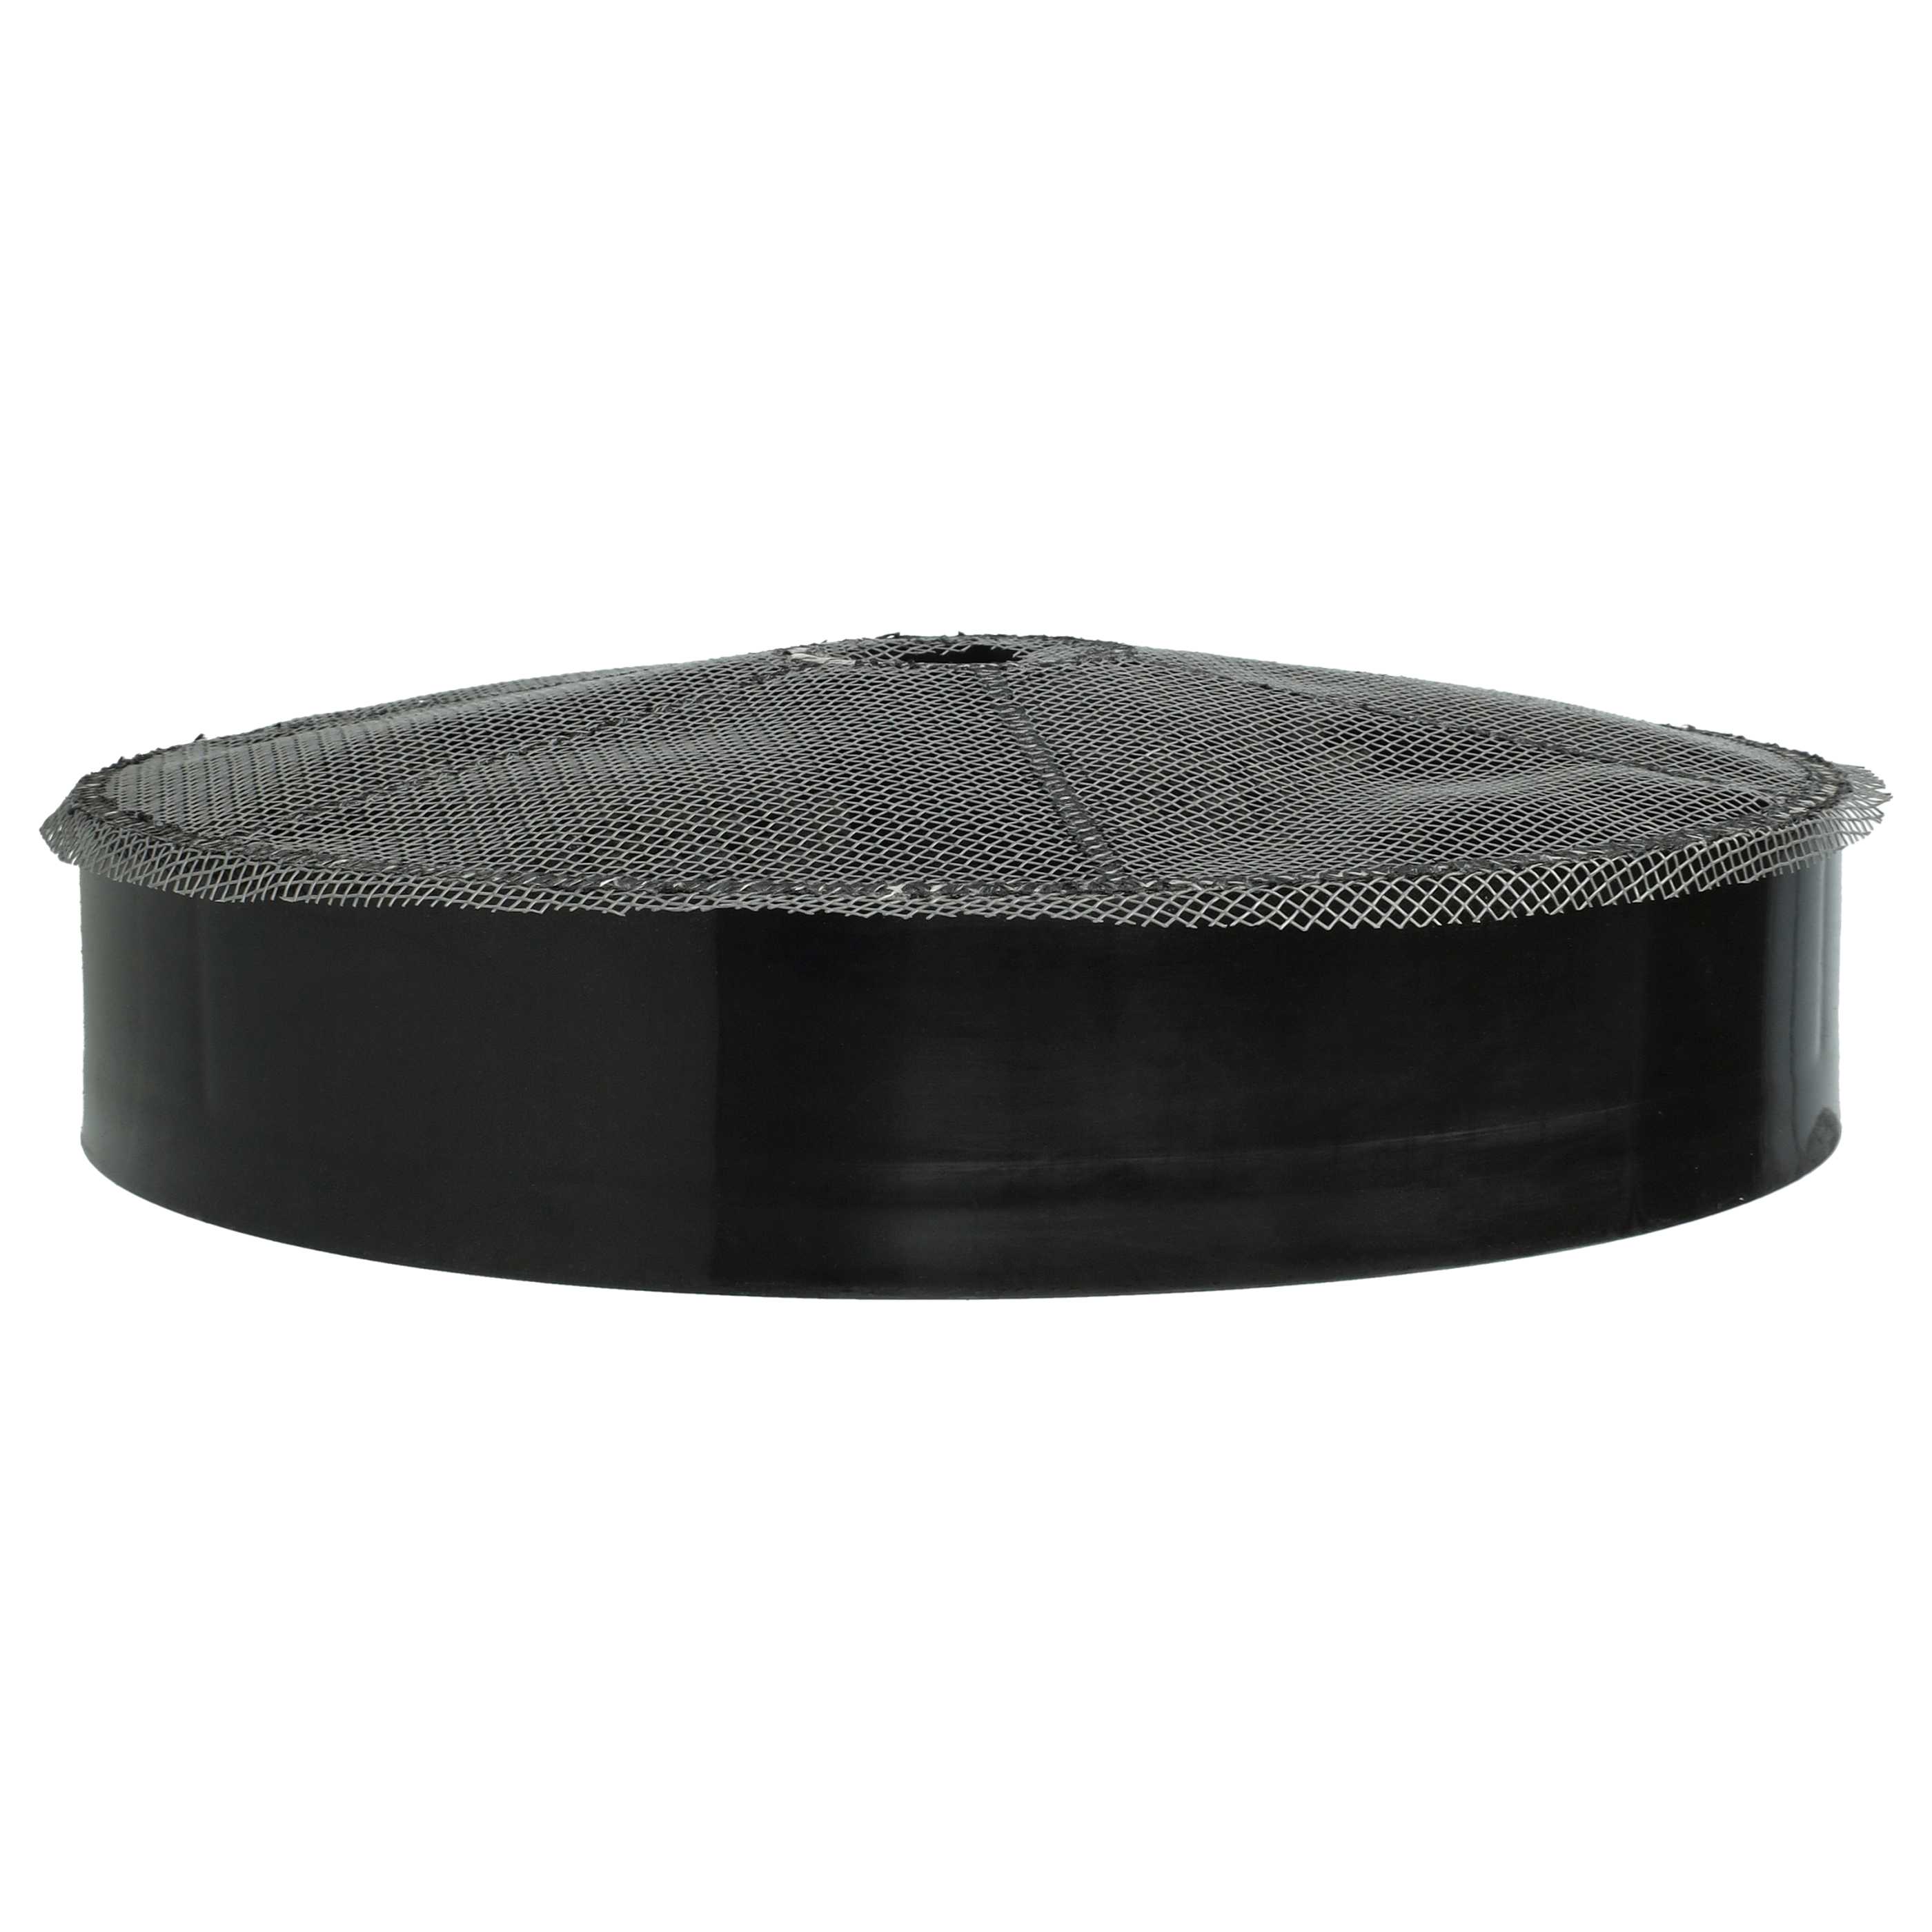 Activated Carbon Filter as Replacement for 50246307008 for Zanussi Hob etc. - with Mesh Cover